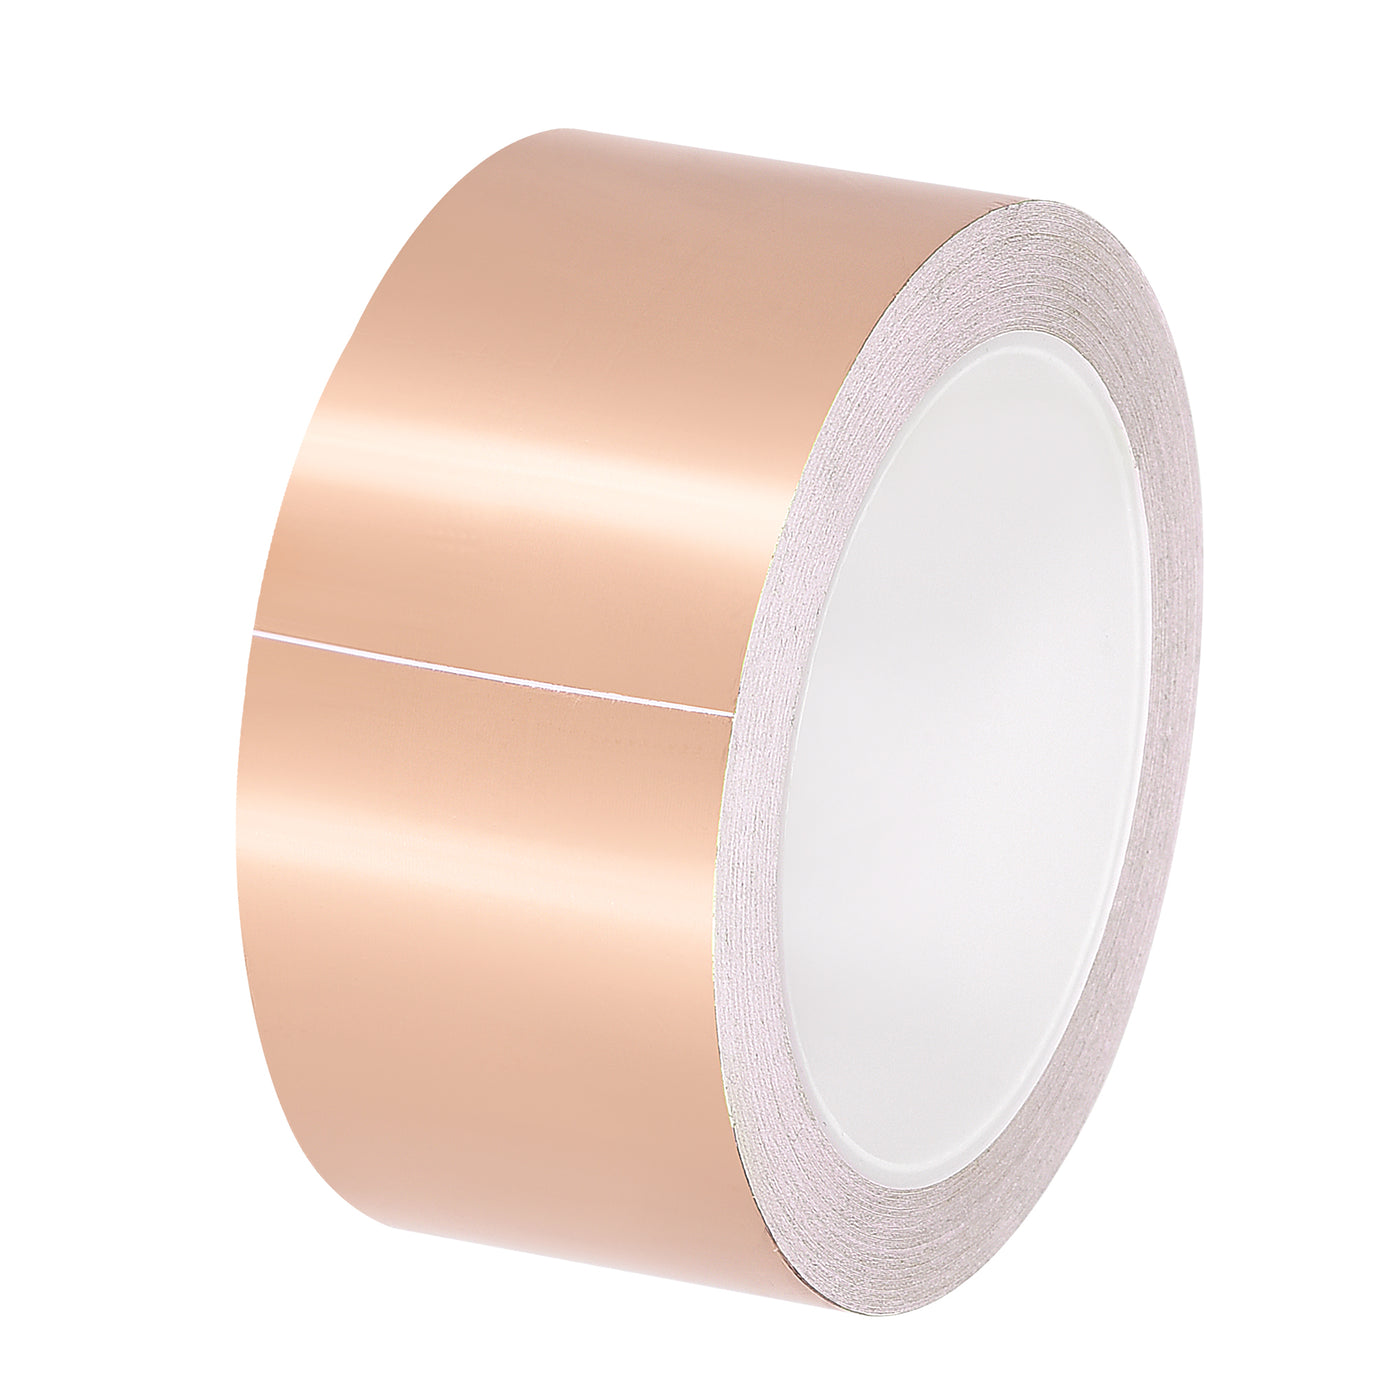 uxcell Uxcell Single-Sided Conductive Tape Copper Foil Tape 50mm x 20m/65.6ft for EMI Shielding 1pcs